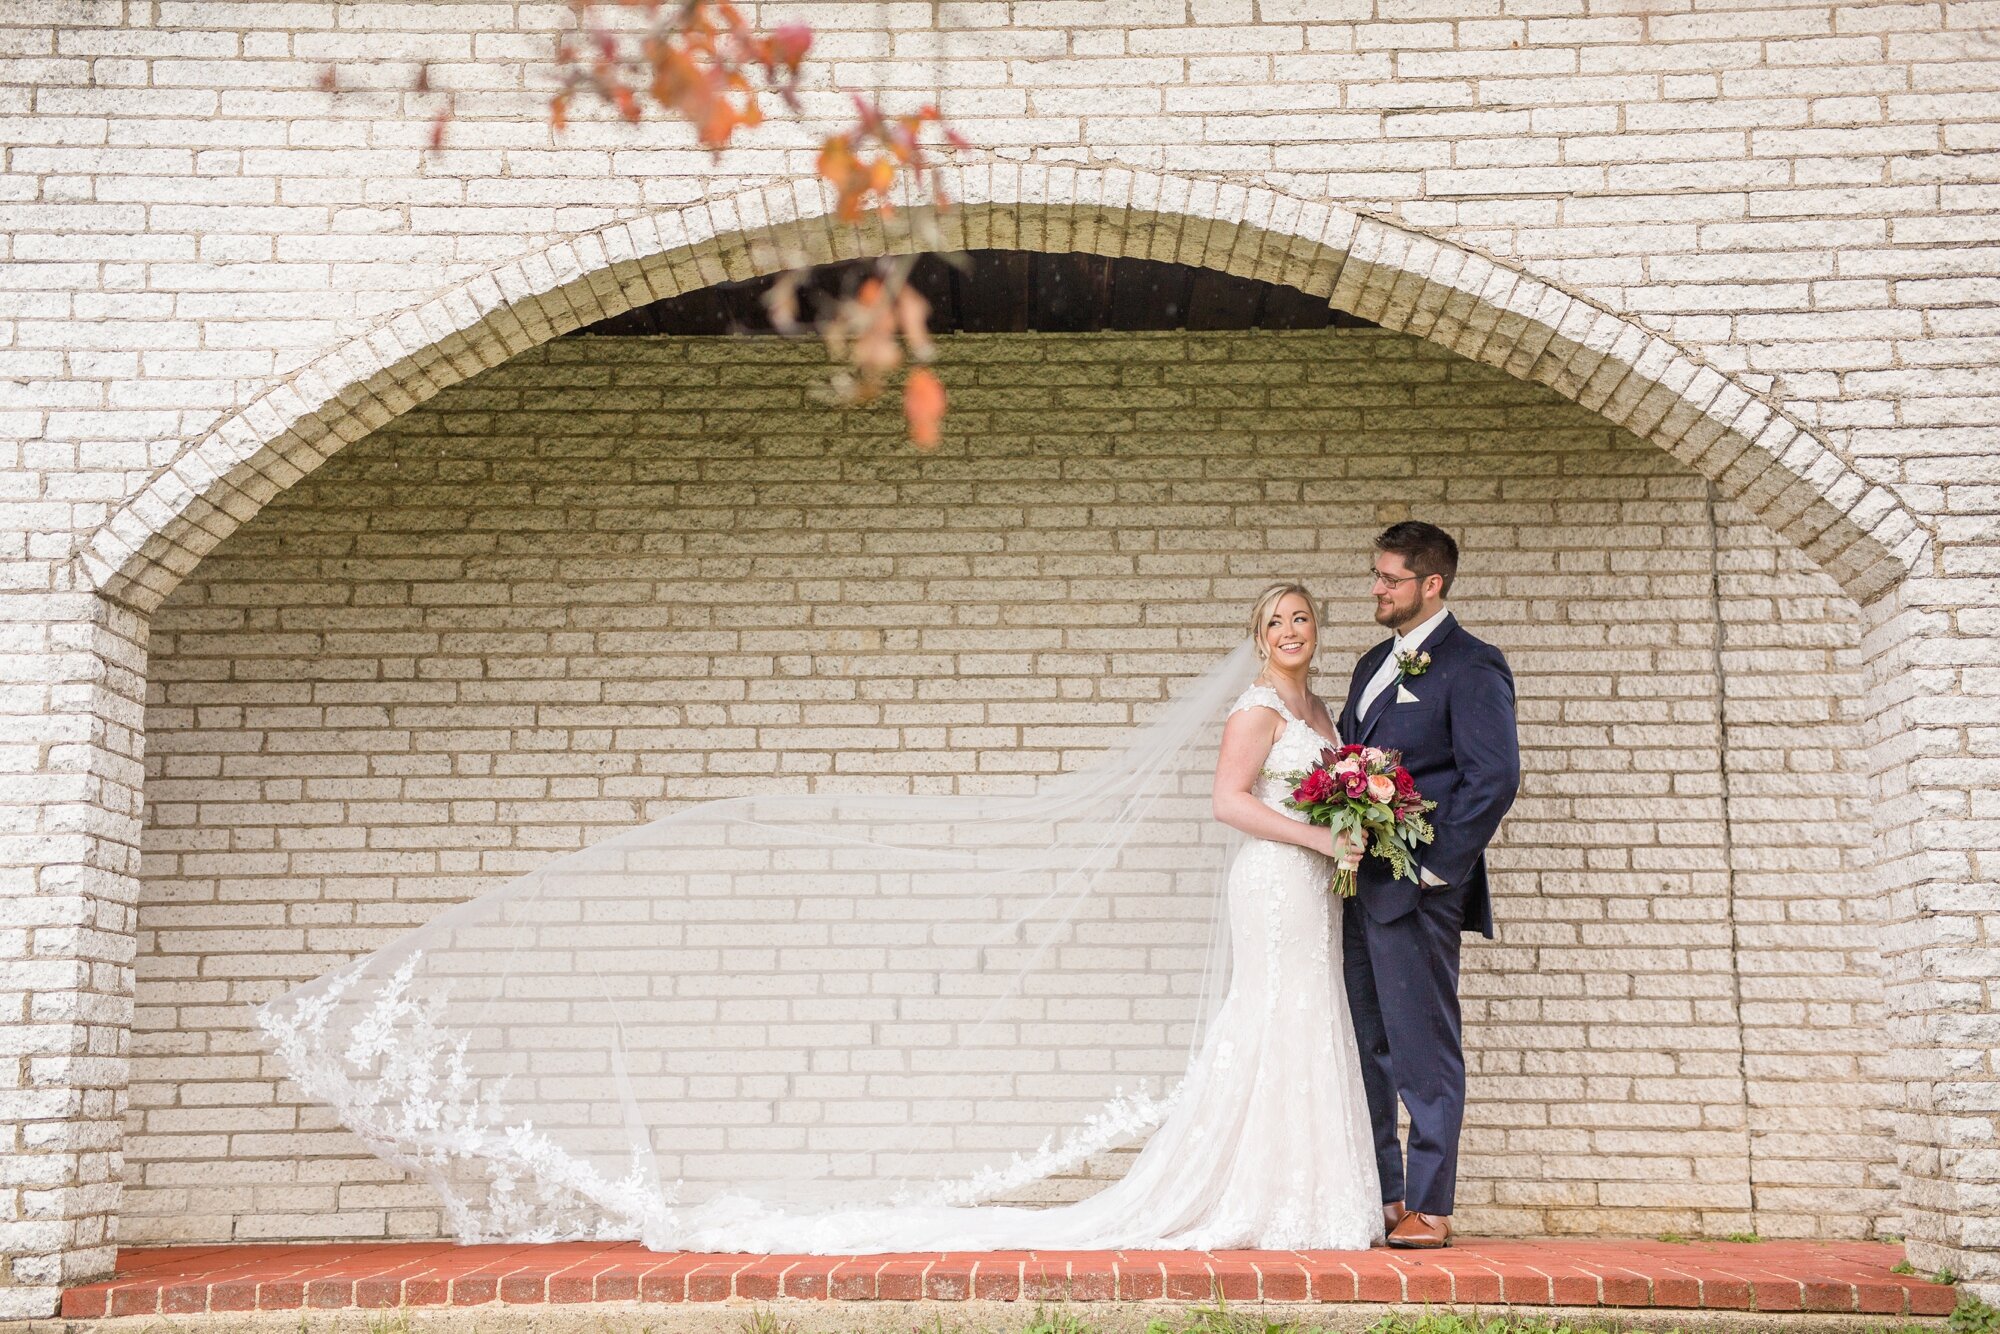  Let me let you in on a little secret: it rained Katie and Shane’s ENTIRE wedding day, but that did not stop us from getting some epic portraits! 